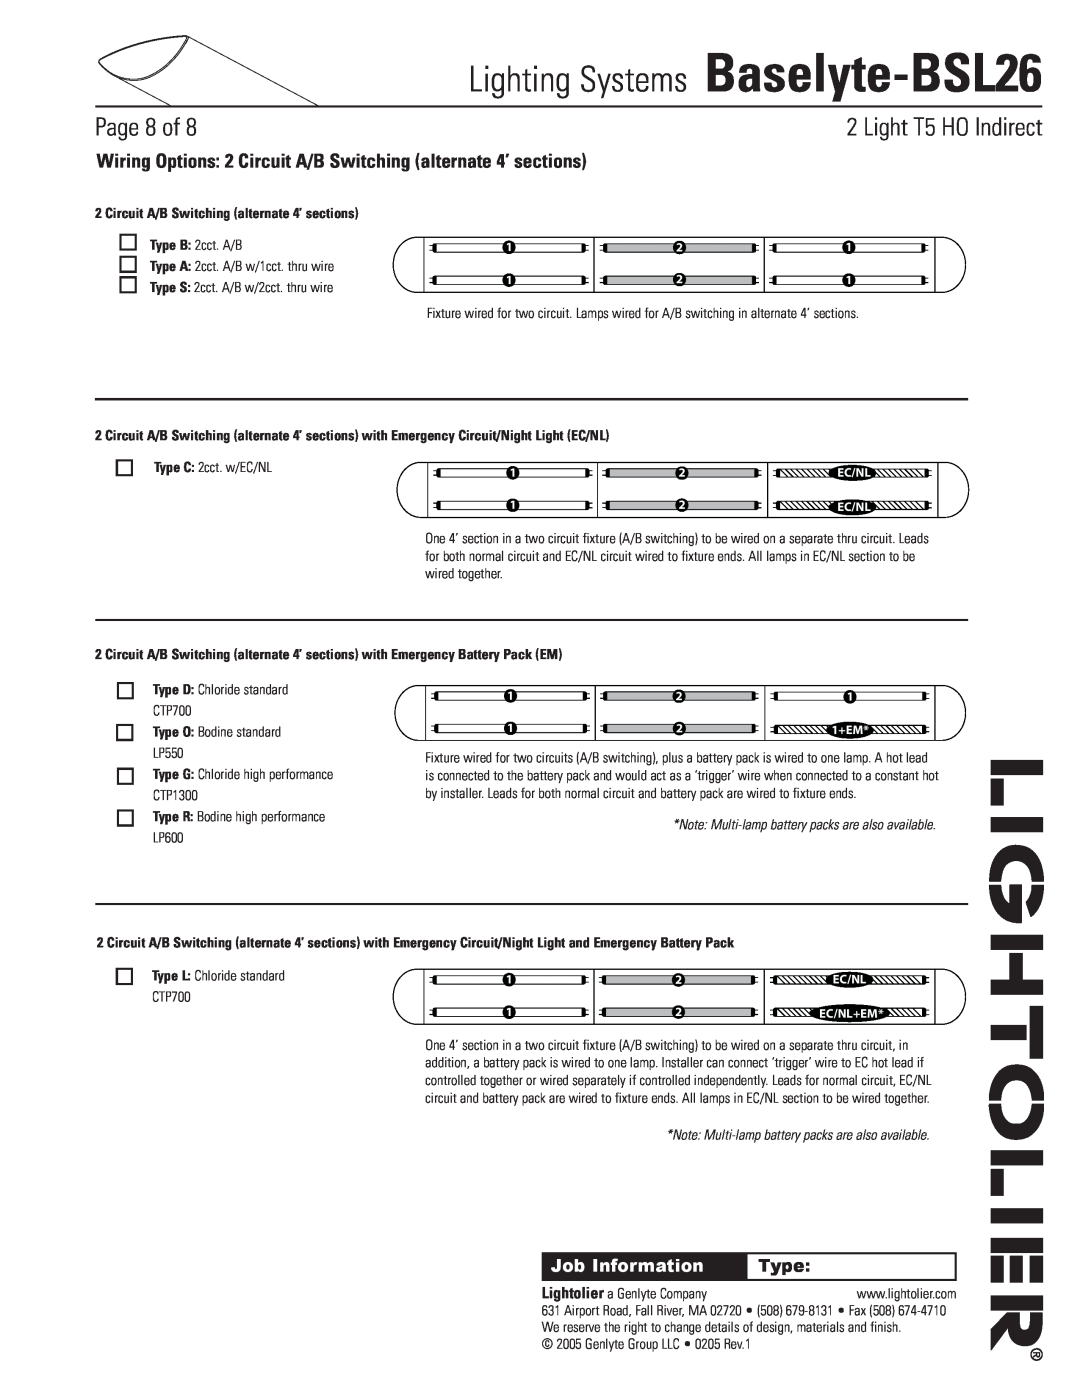 Lightolier Baselyte-BSL26 specifications Circuit A/B Switching alternate 4’ sections, Type O Bodine standard LP550, Page of 